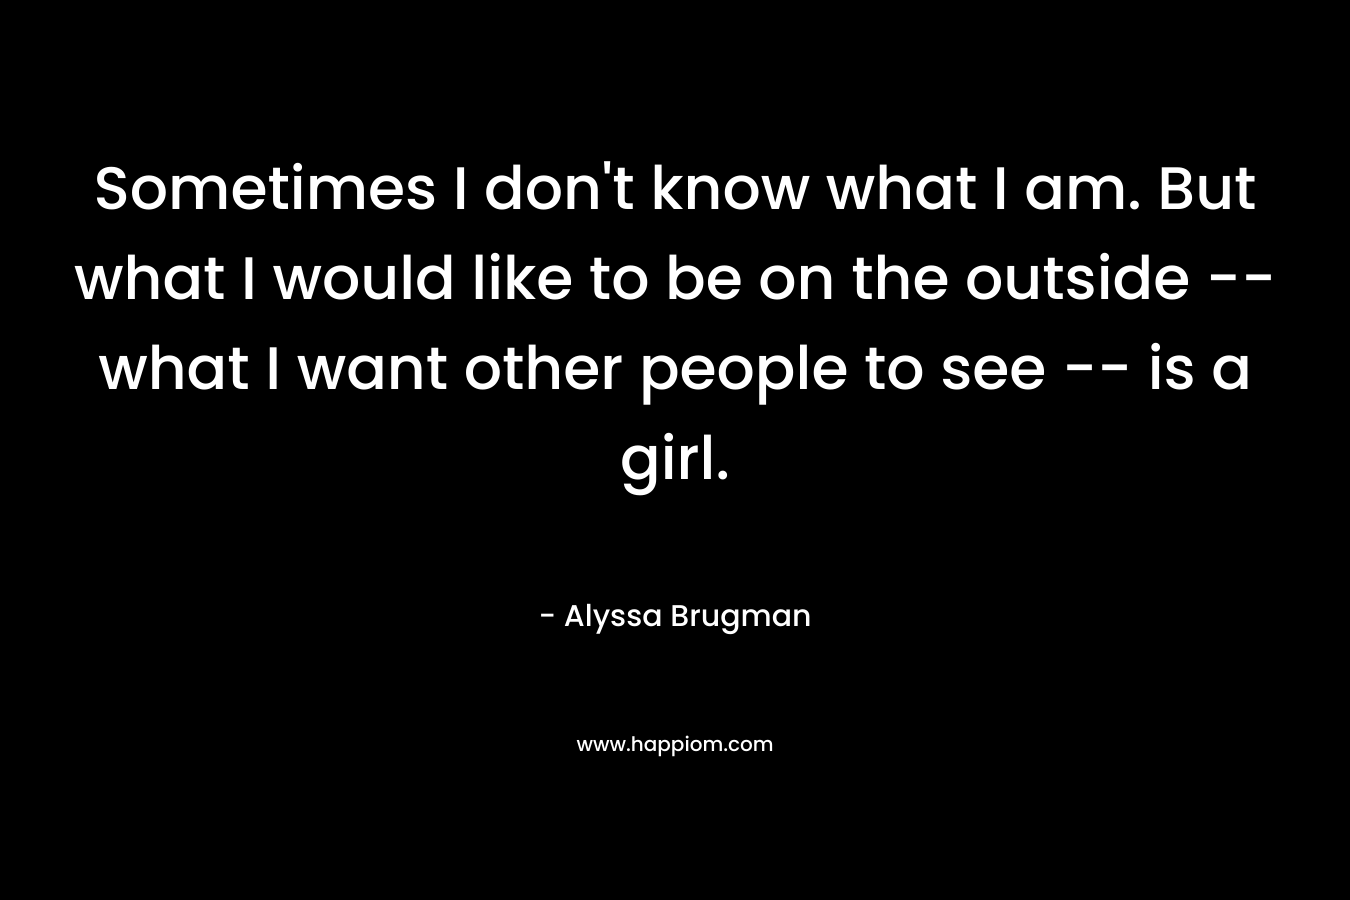 Sometimes I don’t know what I am. But what I would like to be on the outside — what I want other people to see — is a girl. – Alyssa Brugman